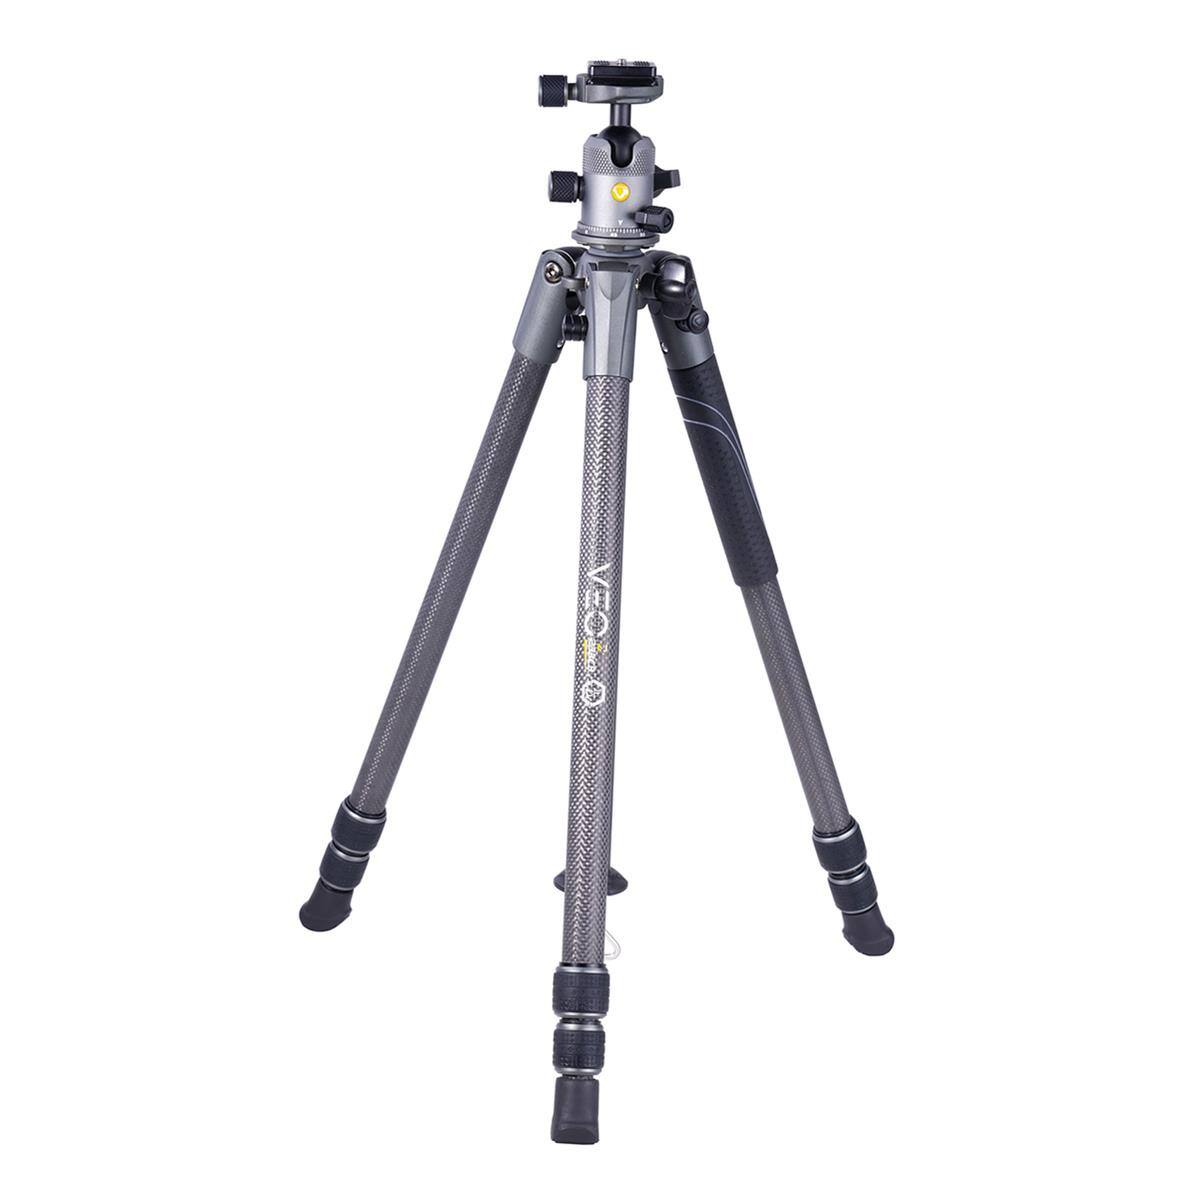 Vanguard VEO 2 233CB 3-Section Carbon Fiber Tripod with Ball Head $110 + free s/h at Adorama